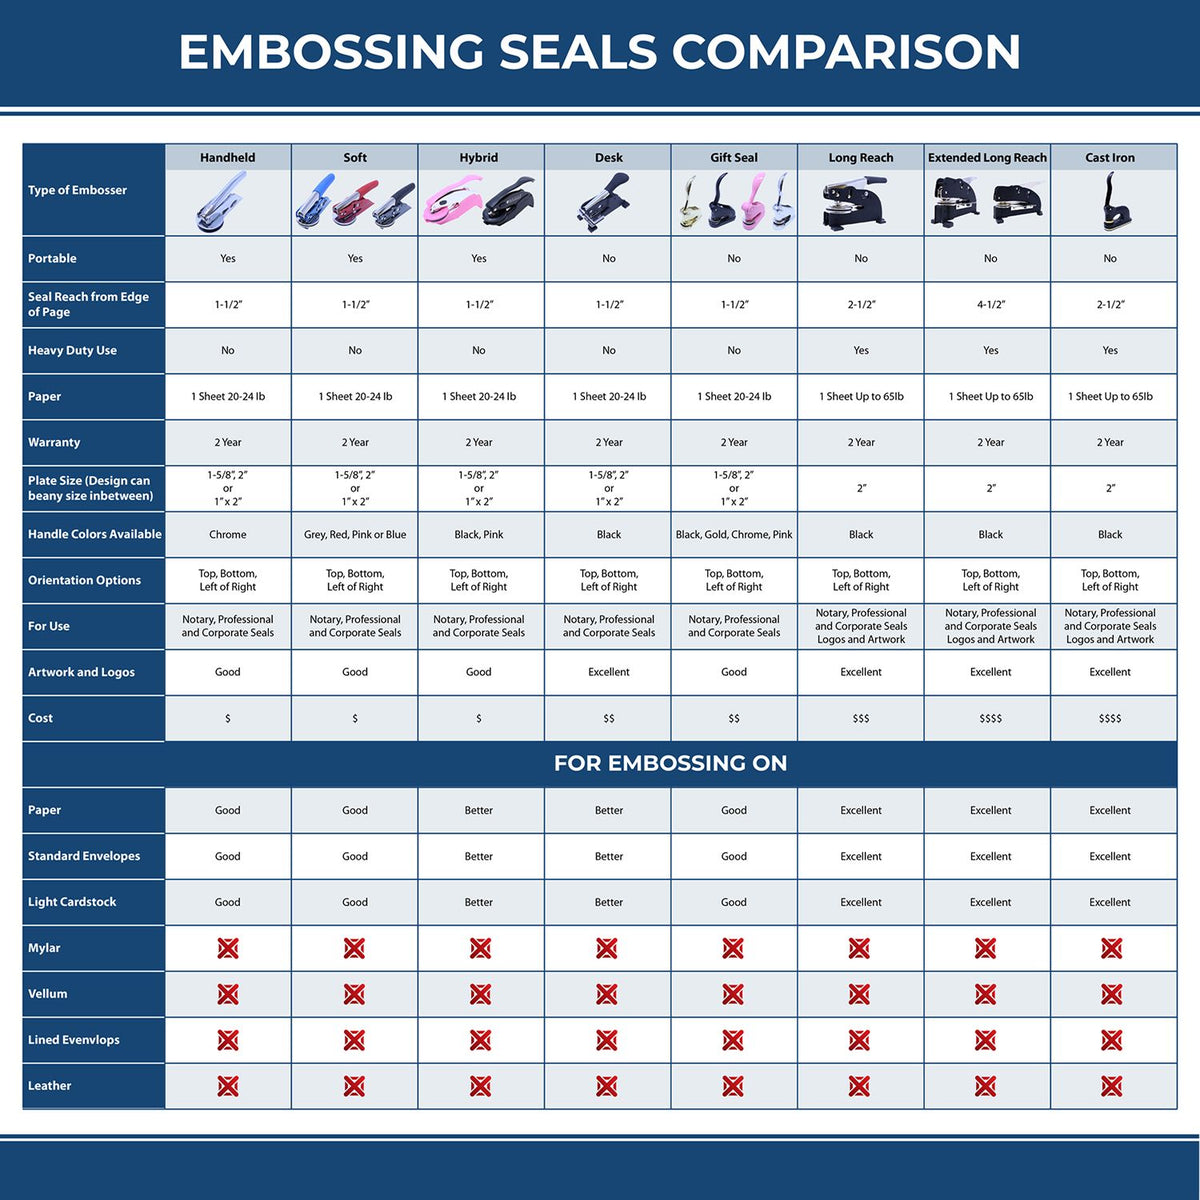 A comparison chart for the different types of mount models available for the Handheld Minnesota Professional Engineer Embosser.